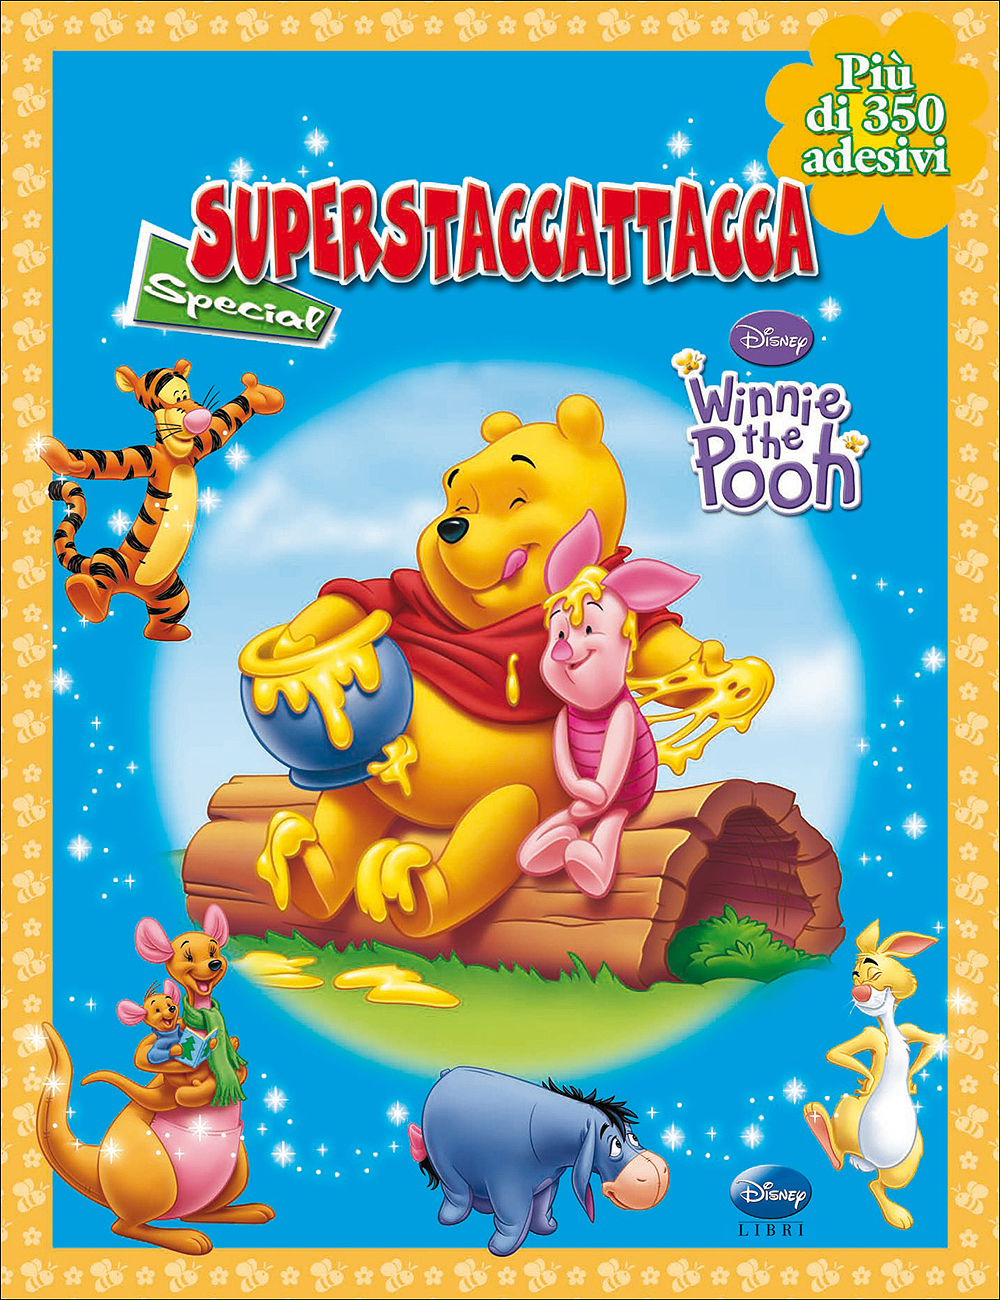 Superstaccattacca Special - Winnie the Pooh